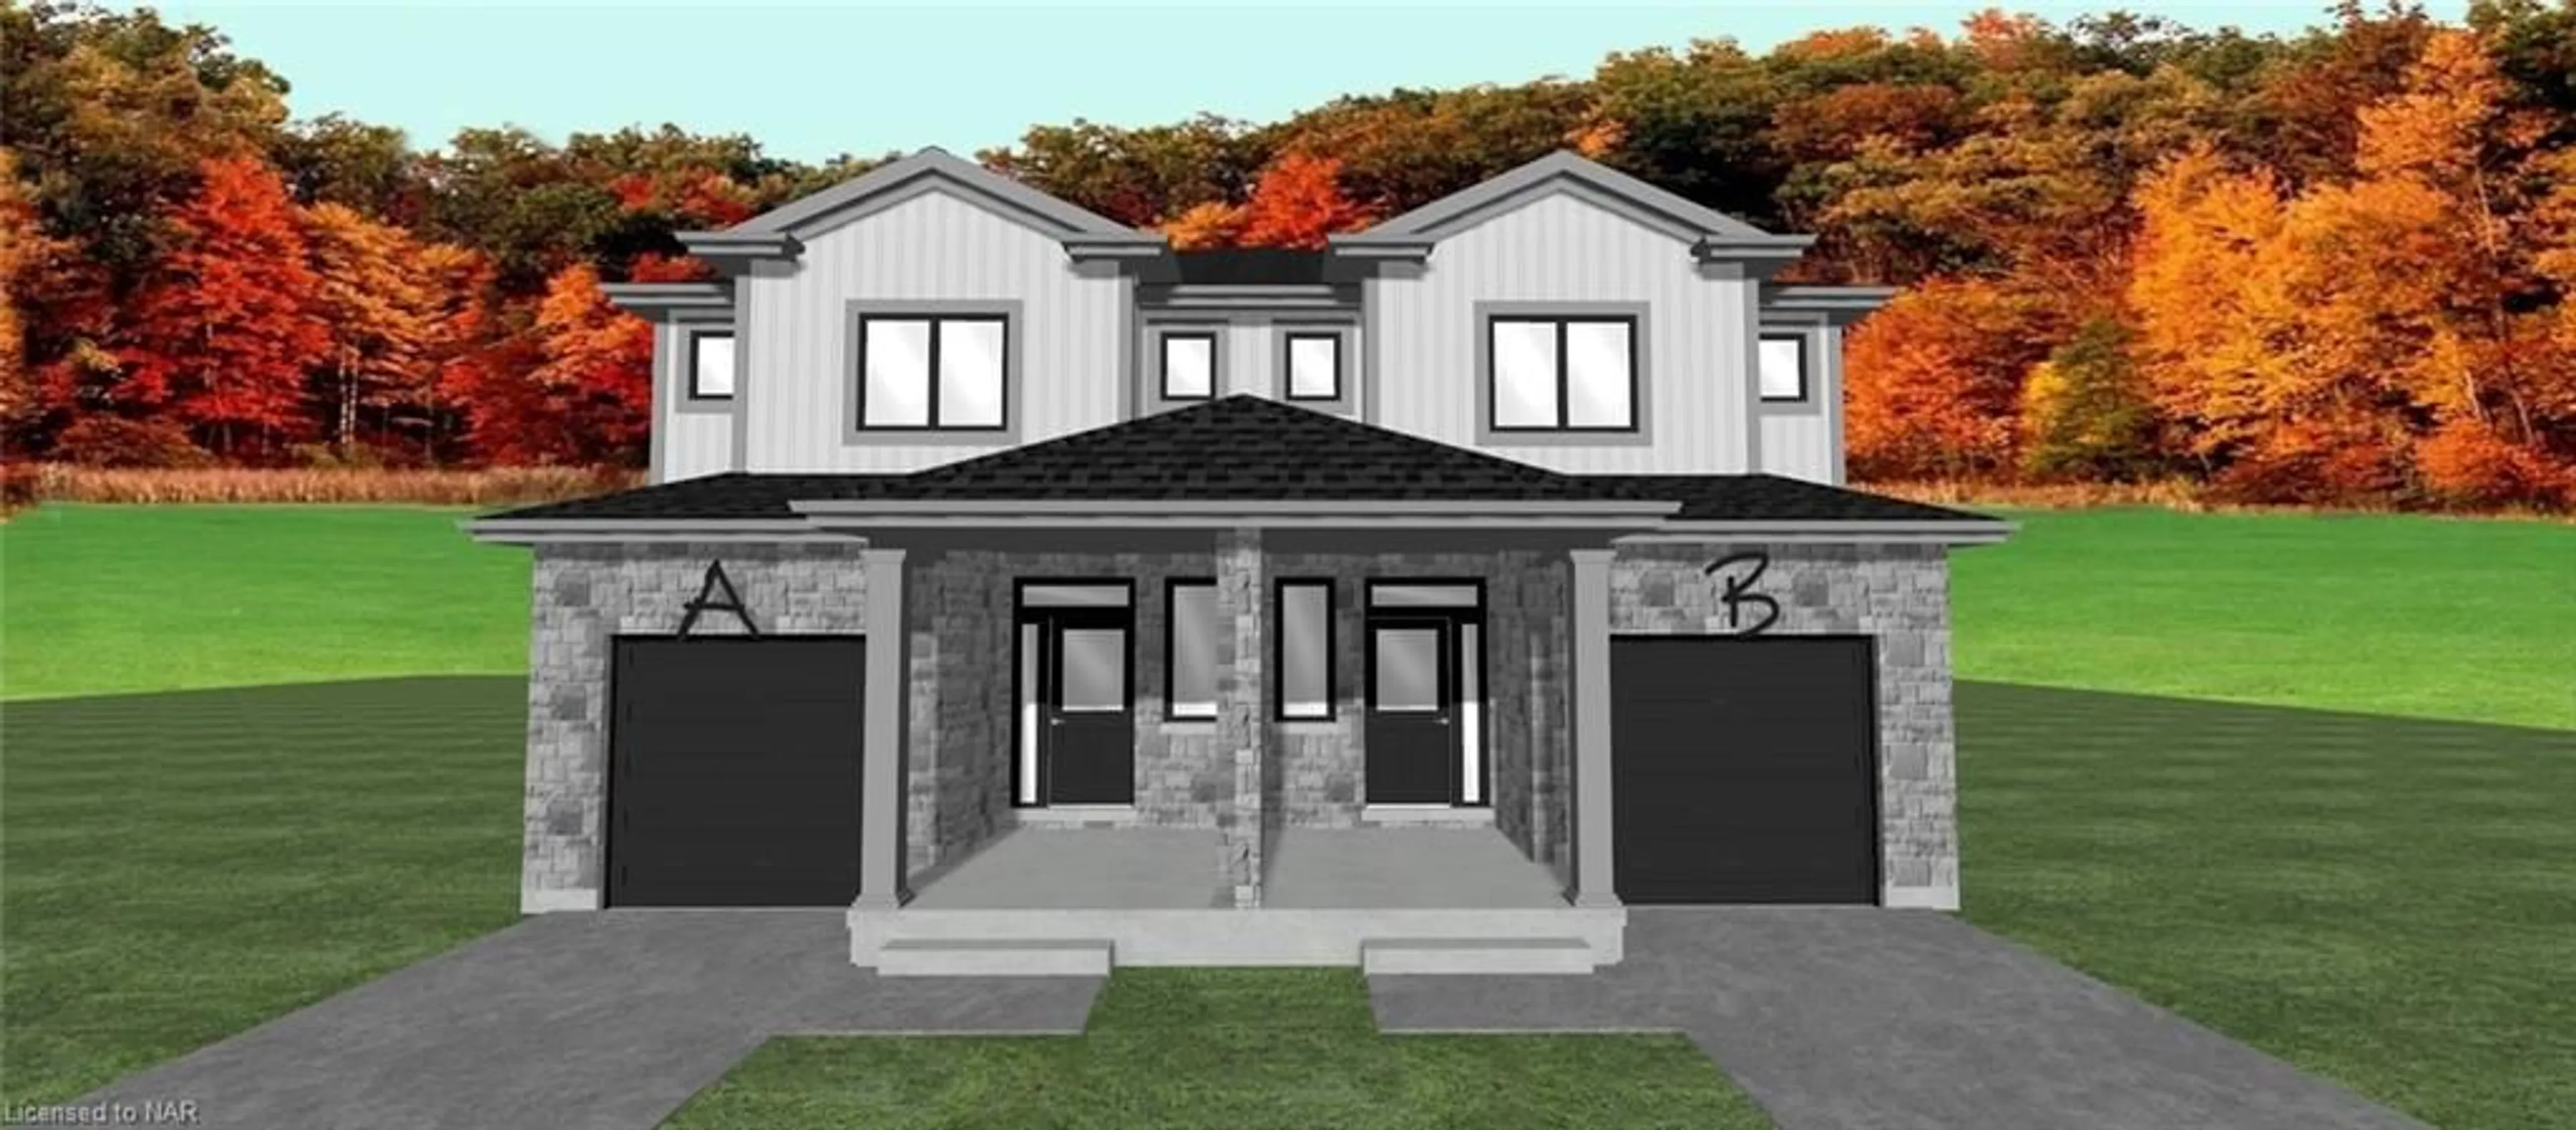 Frontside or backside of a home for LOT 133 A Hawkins St, Niagara Falls Ontario L2G 3B7